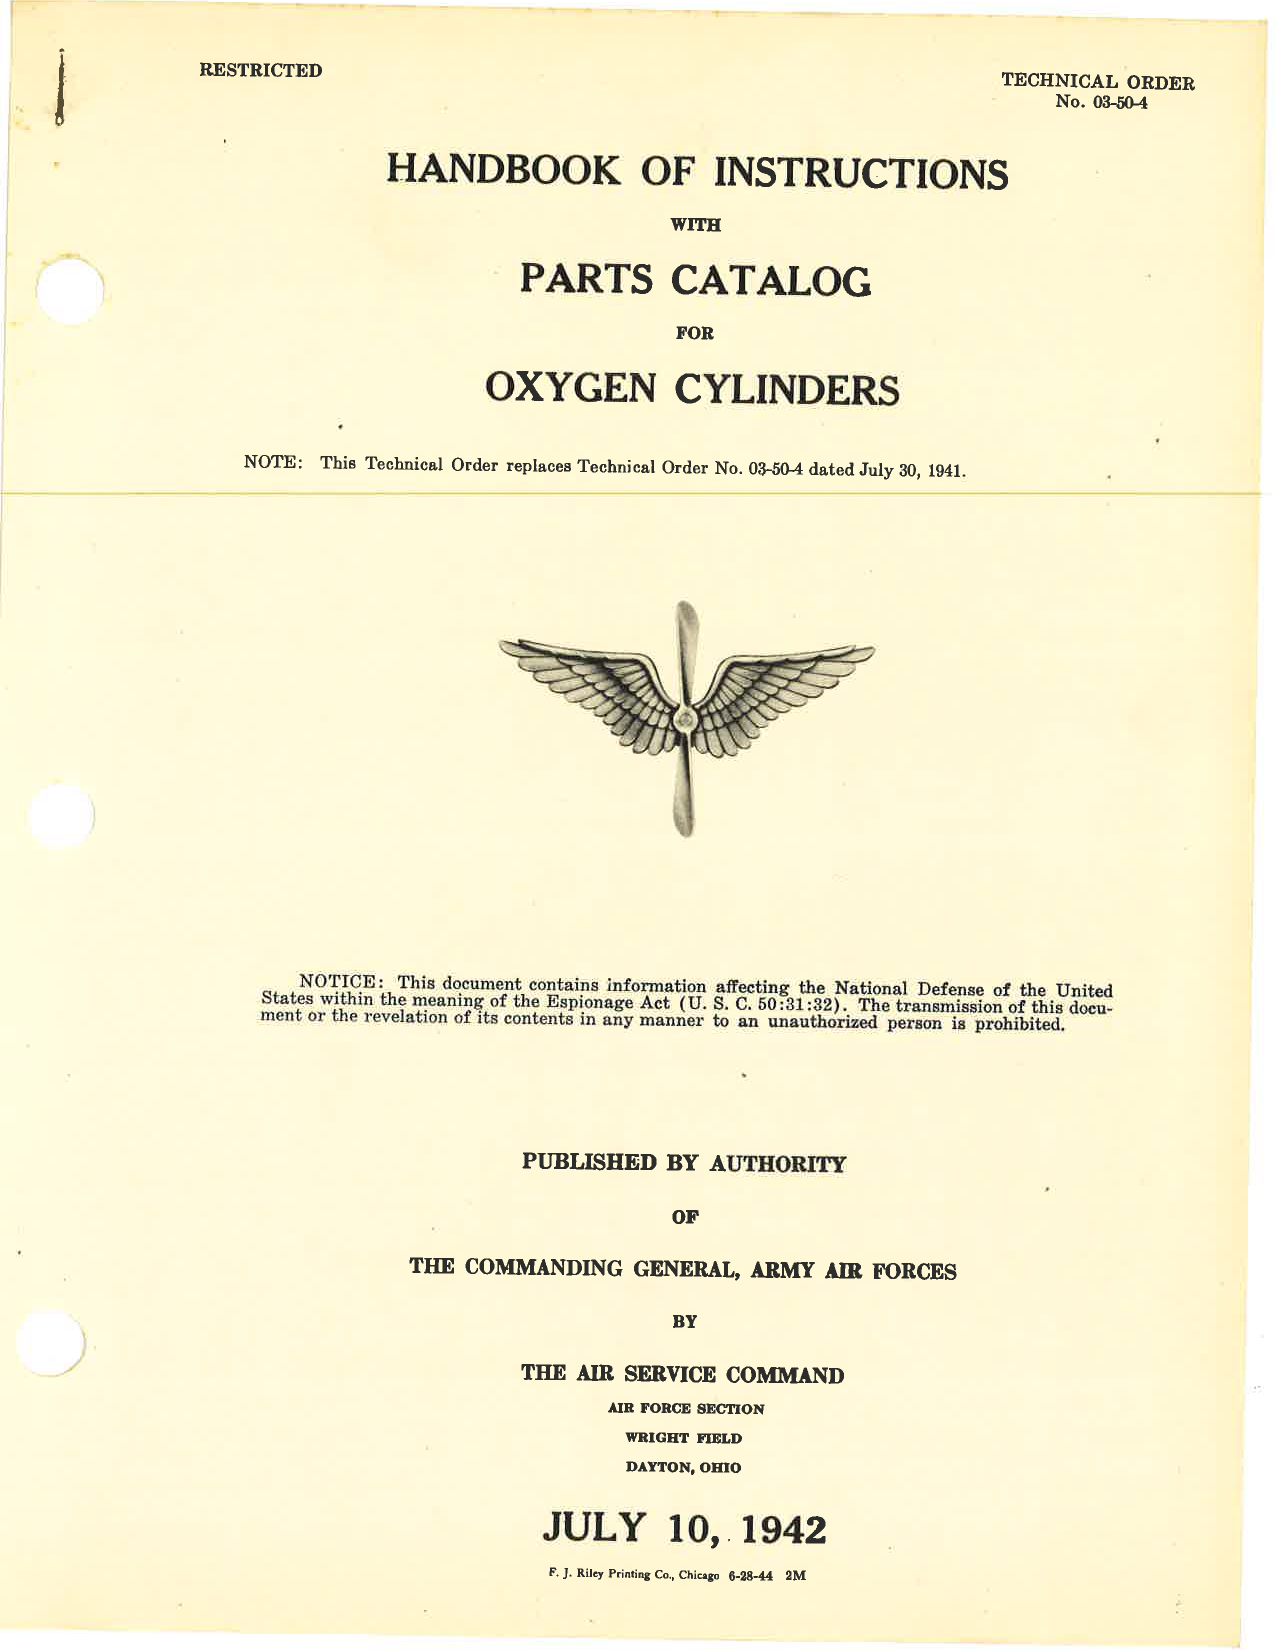 Sample page 1 from AirCorps Library document: Handbook of Instructions with Parts Catalog for Oxygen Cylinders